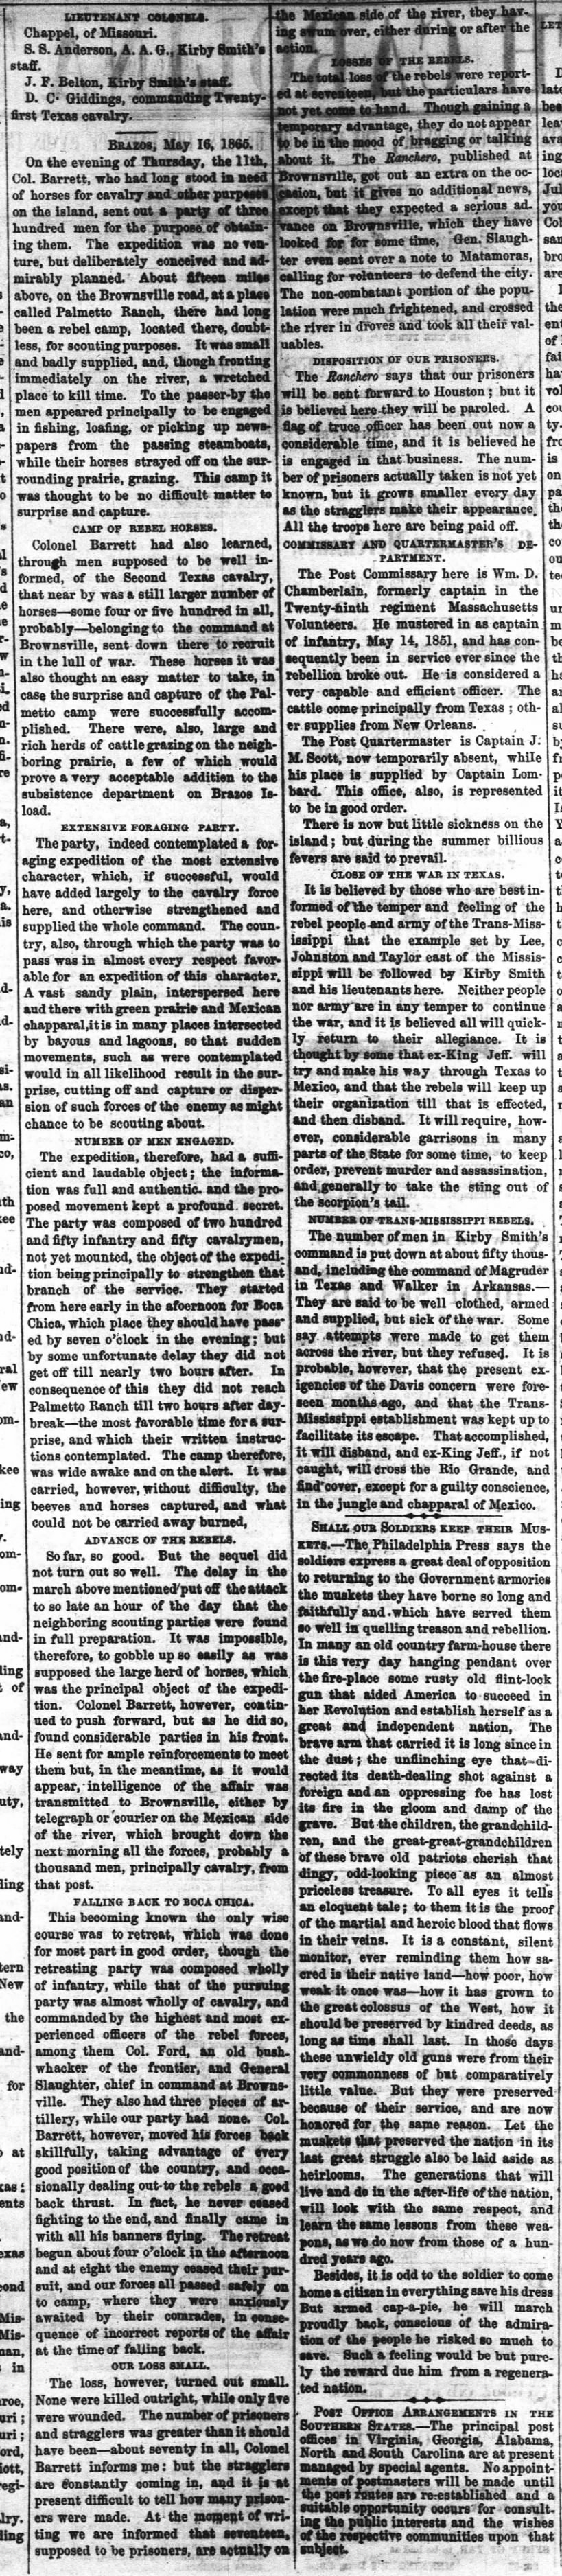 Newspaper account of the Battle of Palmito Ranch